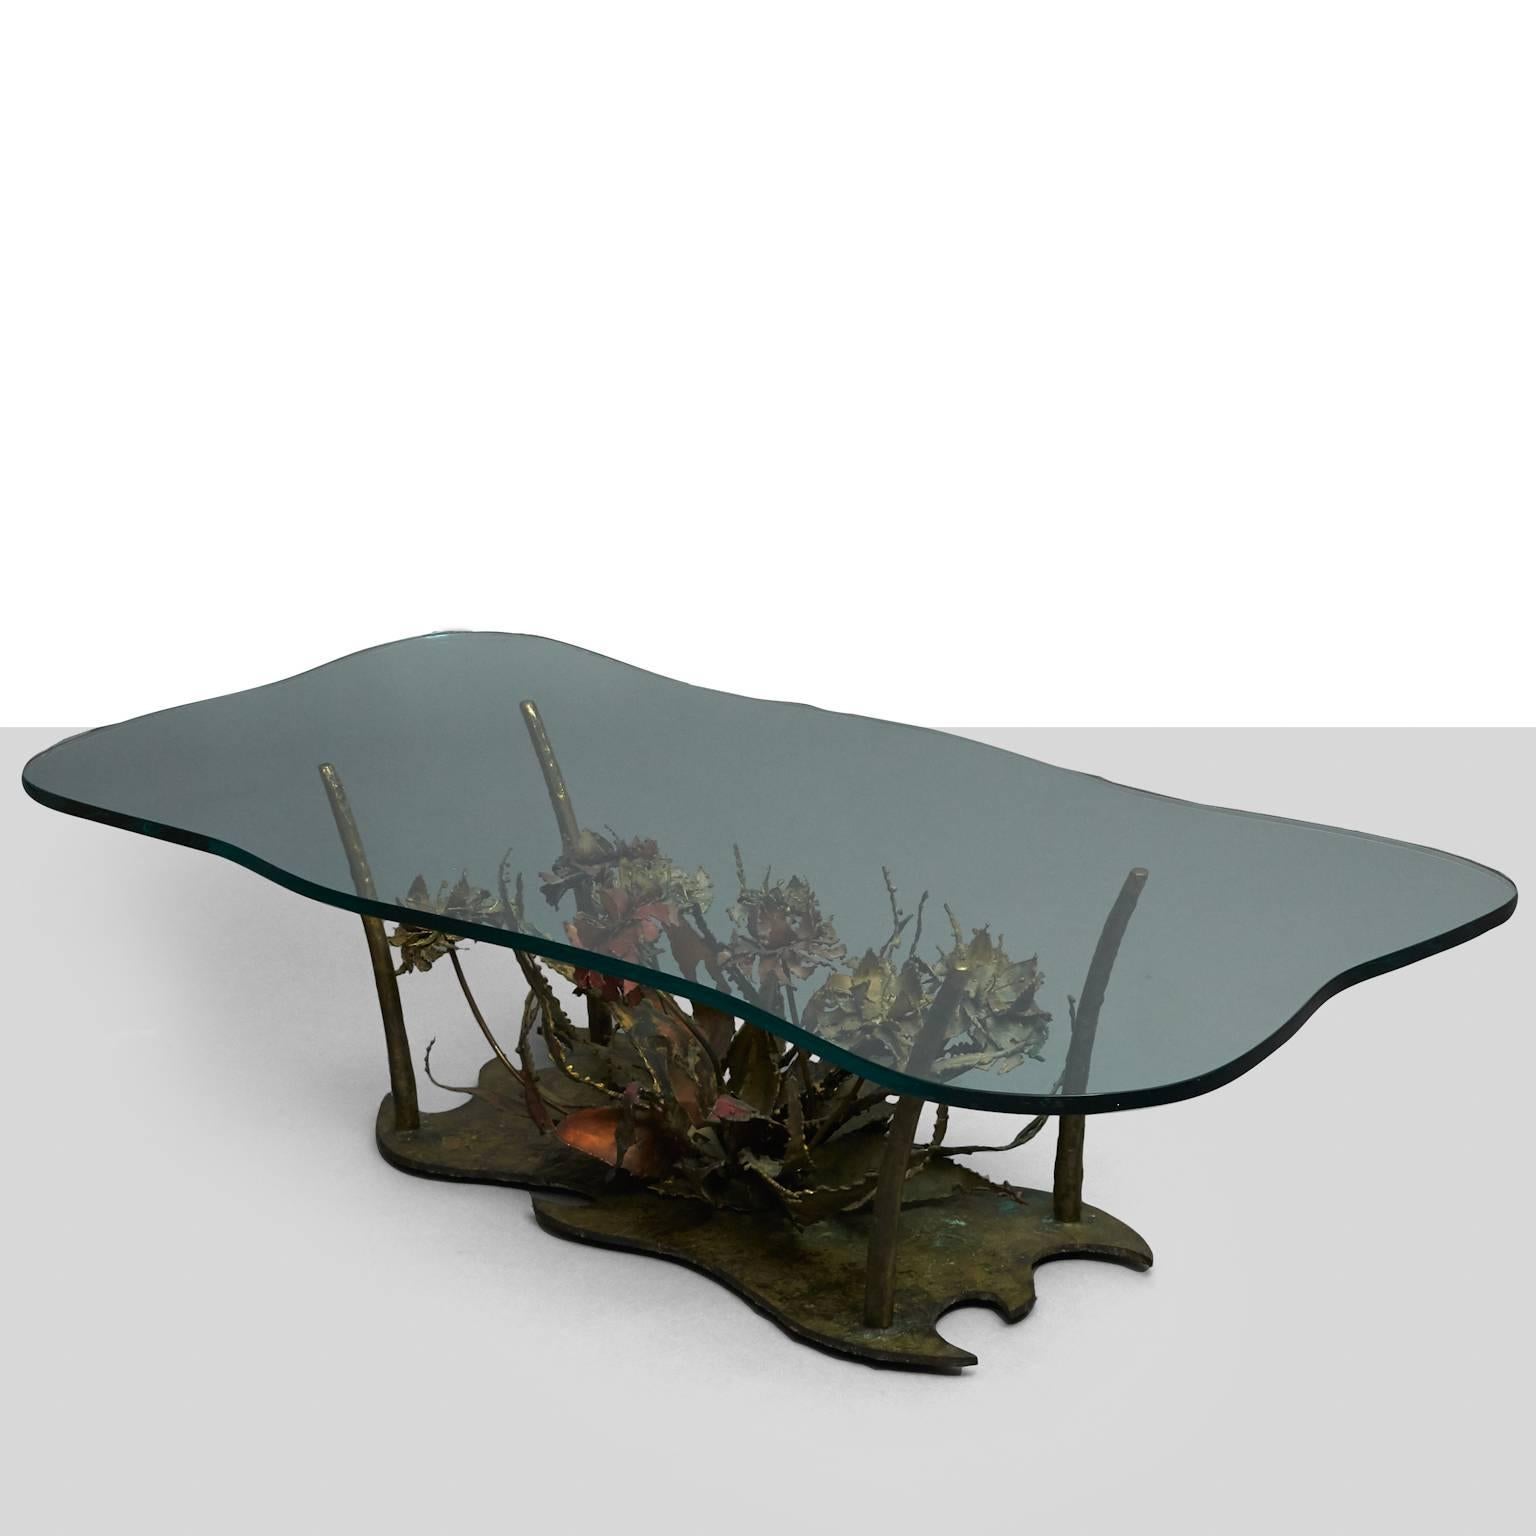 A Brutalist coffee table by Silas Seandel as part of his Woodland series. Featuring an amorphous glass top upon a steel sculptural floral base.